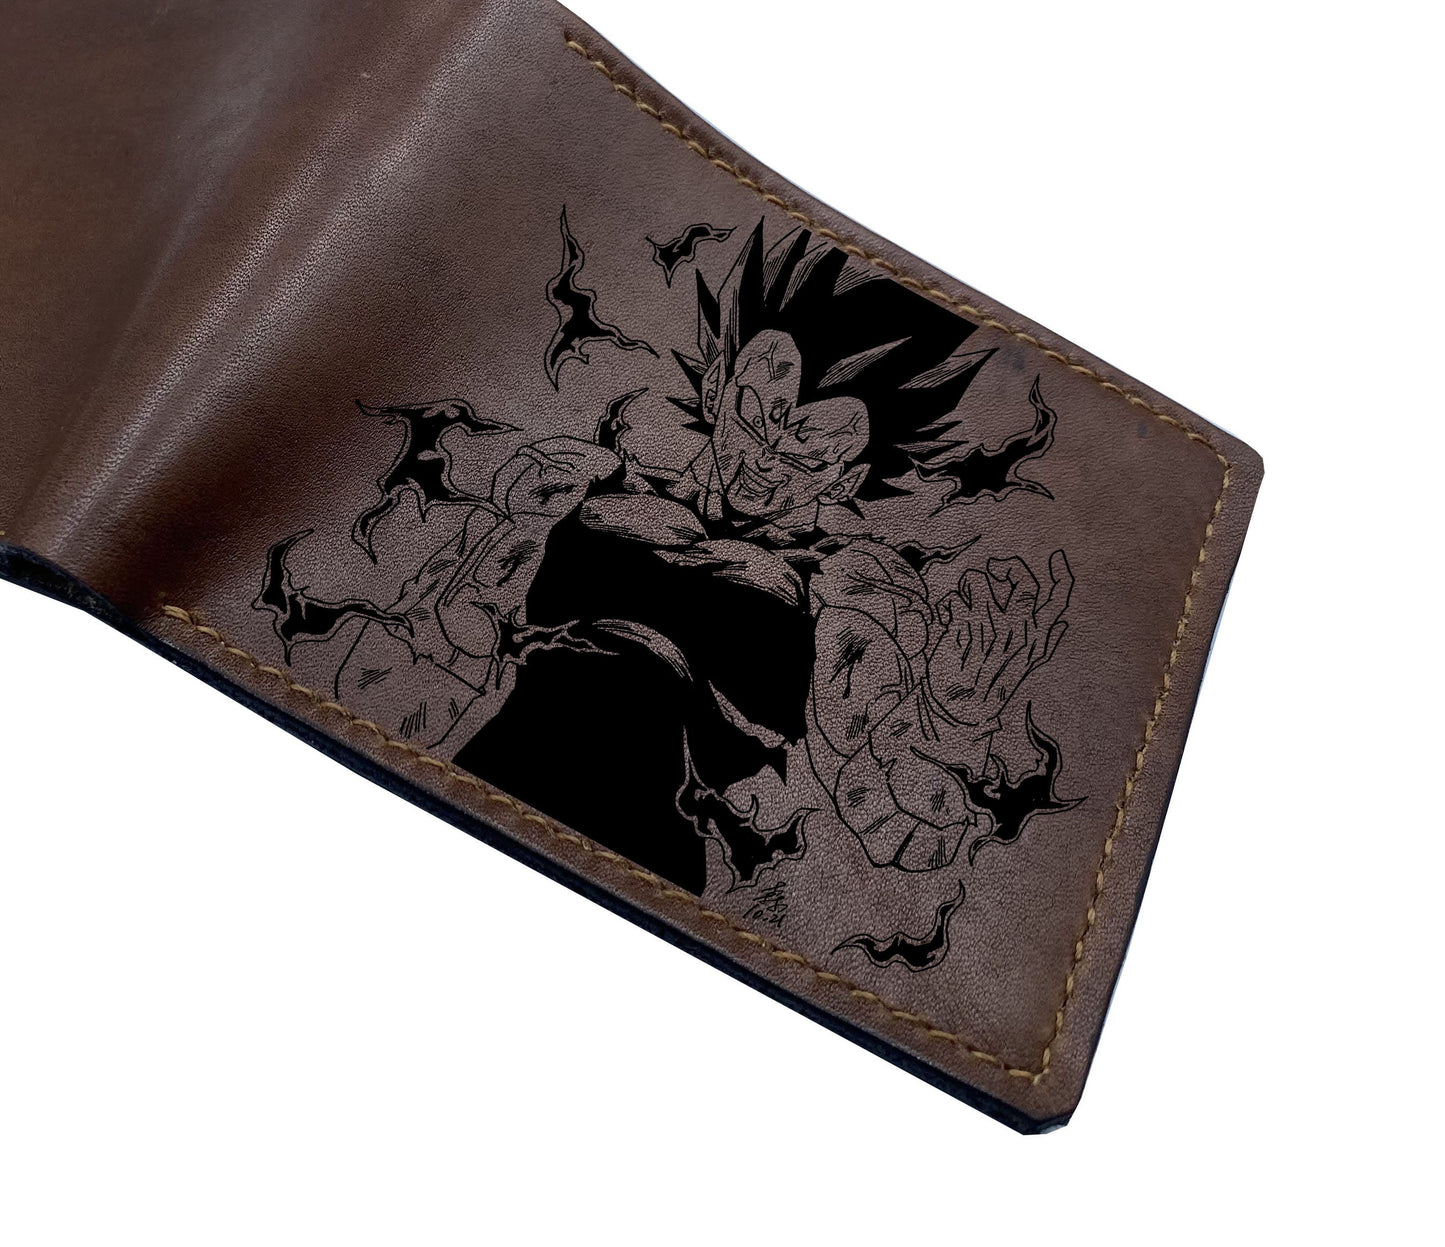 Mayan Corner - Dragon ball characters drawing leather wallet, fan art leather gift for men, wallet for him, leather anniversary present ideas - Majin Buu